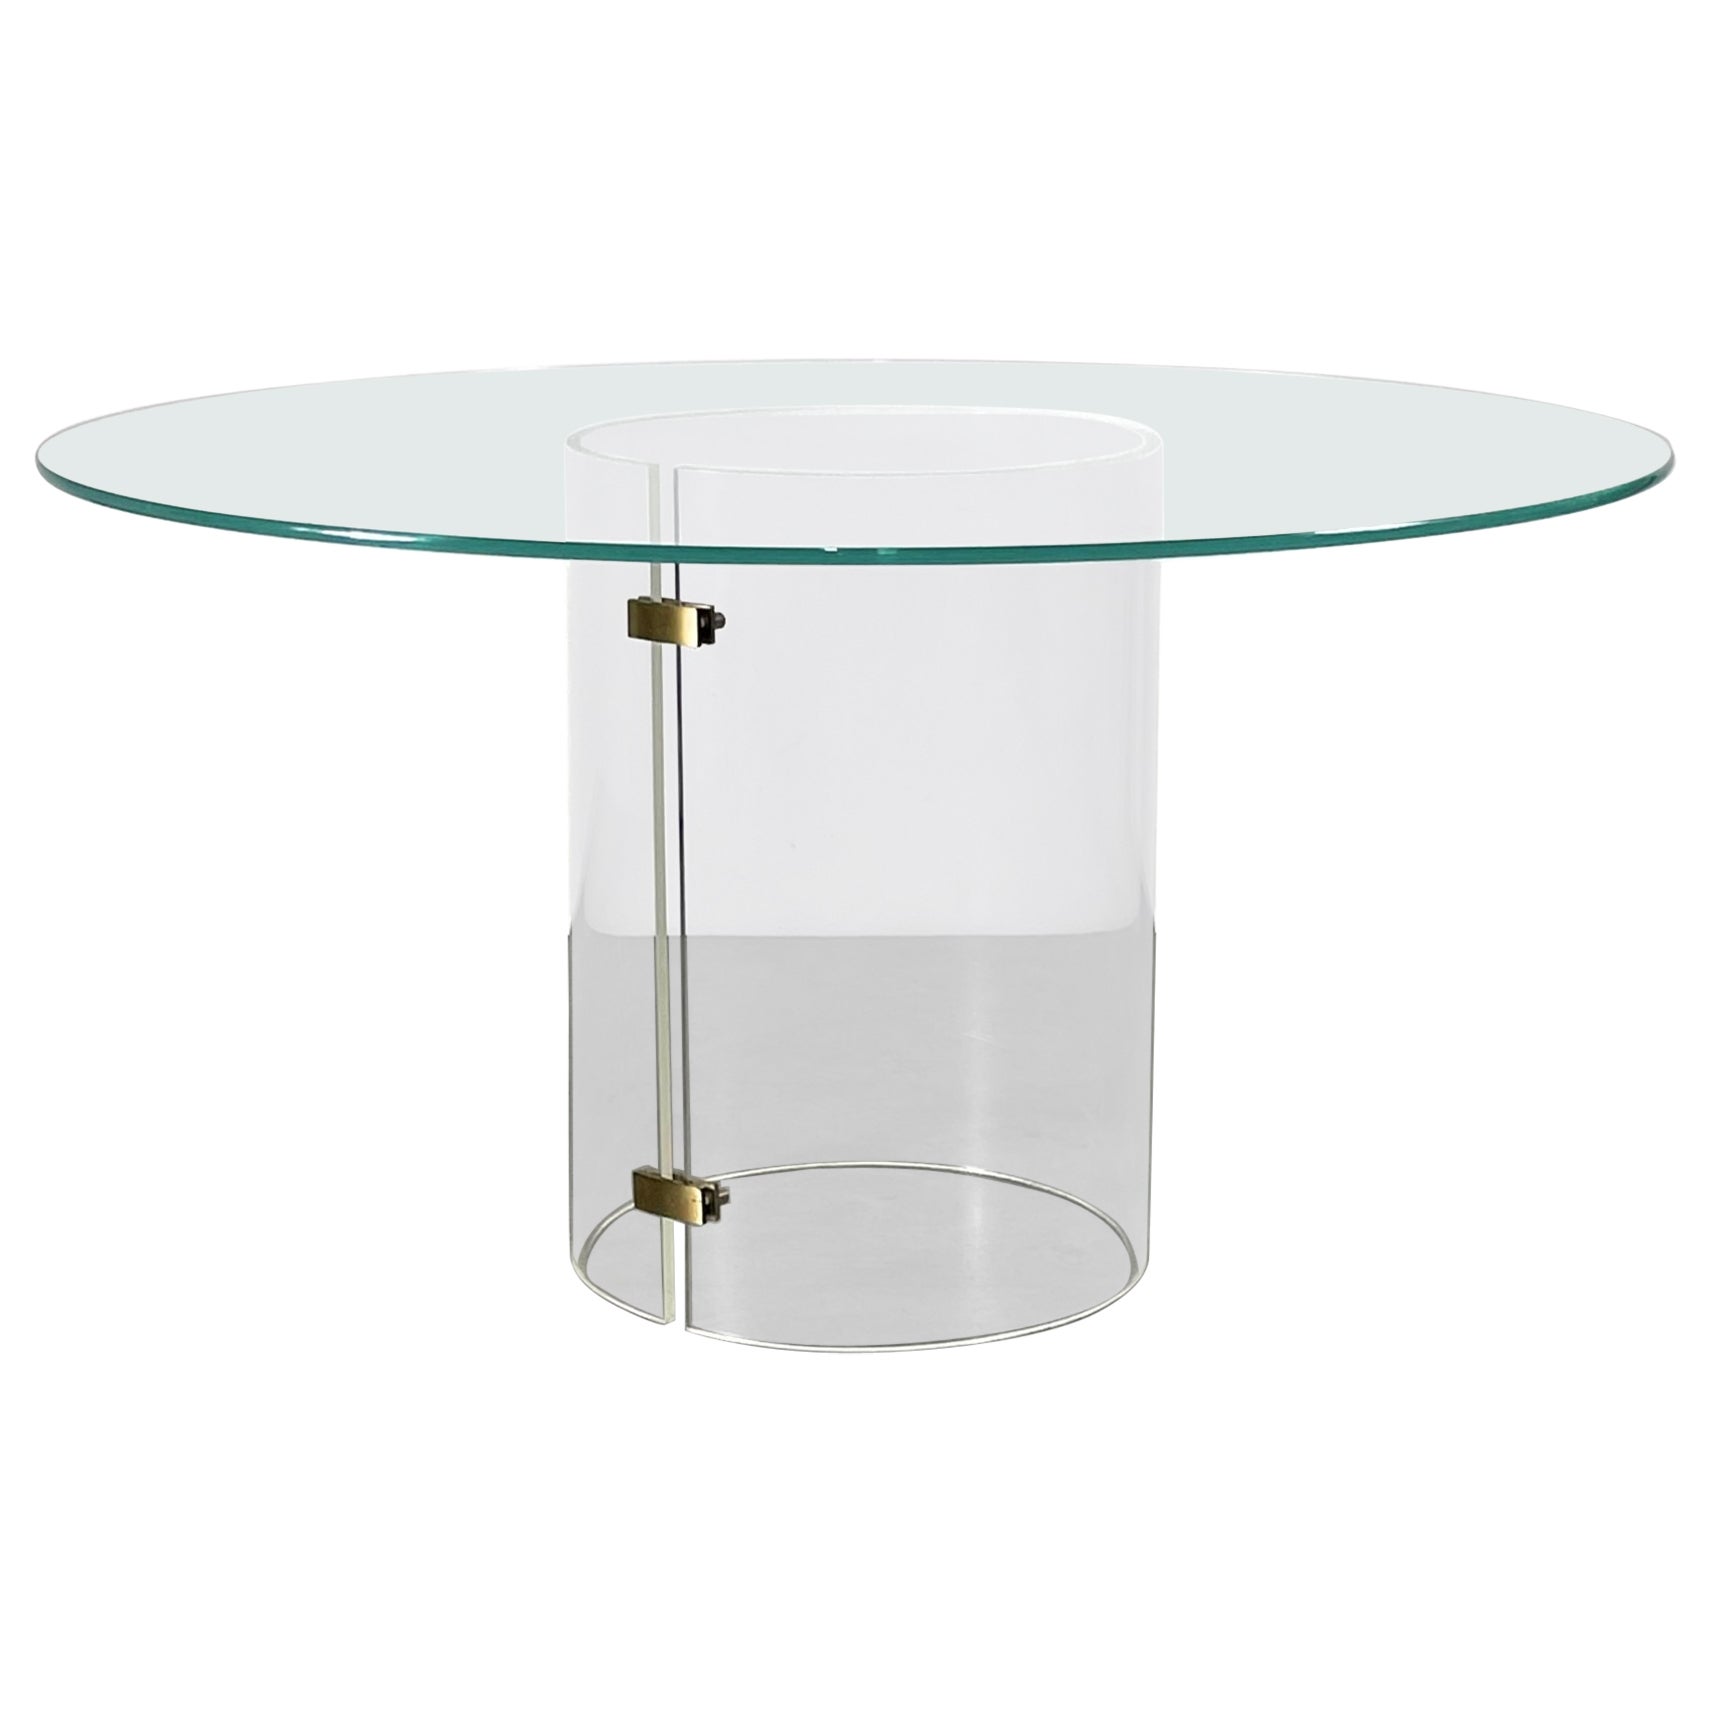 Vintage Round Pedestal Dining Table in Lucite Brass and Glass circa 1970s For Sale